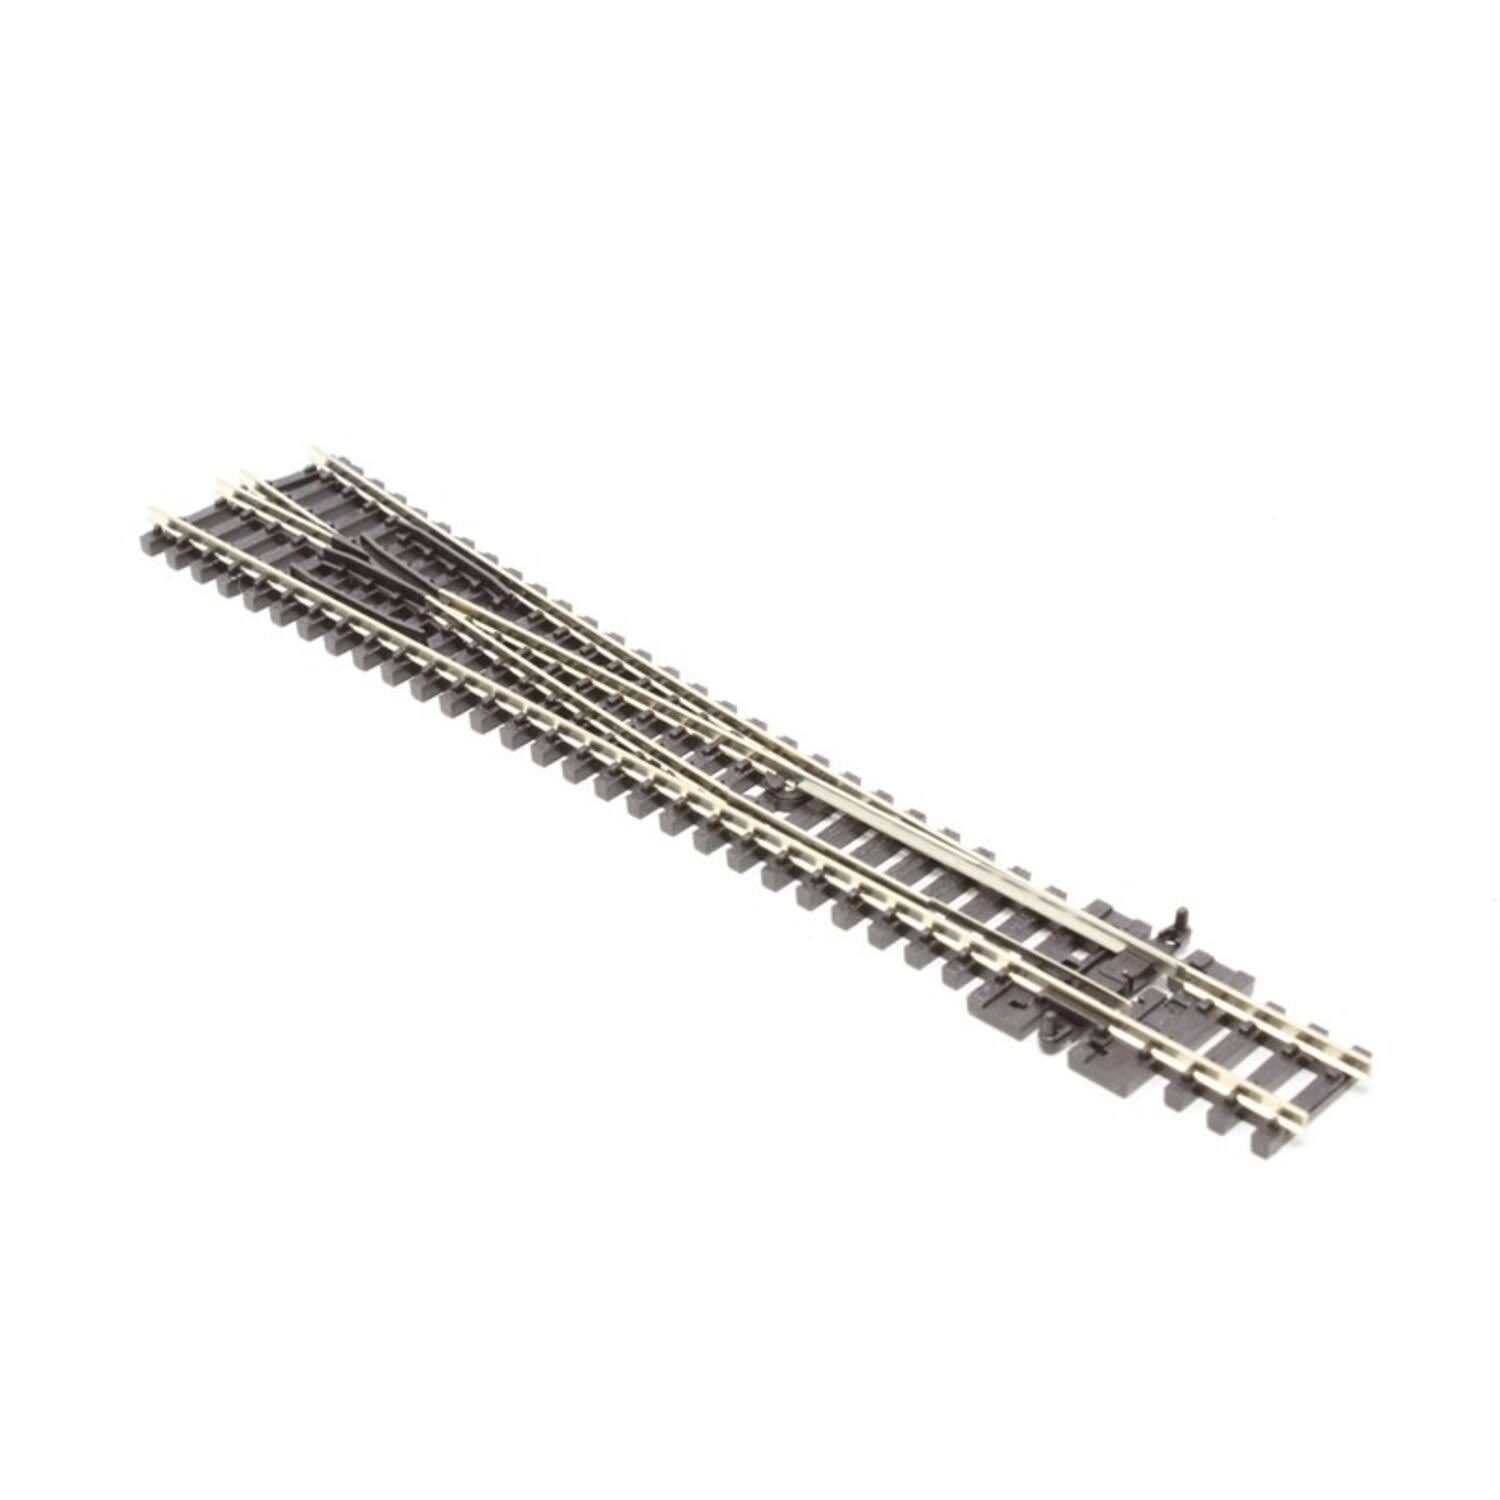 Peco SL-388 N Scale Code 80 Insulfrog #8 Right-Hand Turnout Track